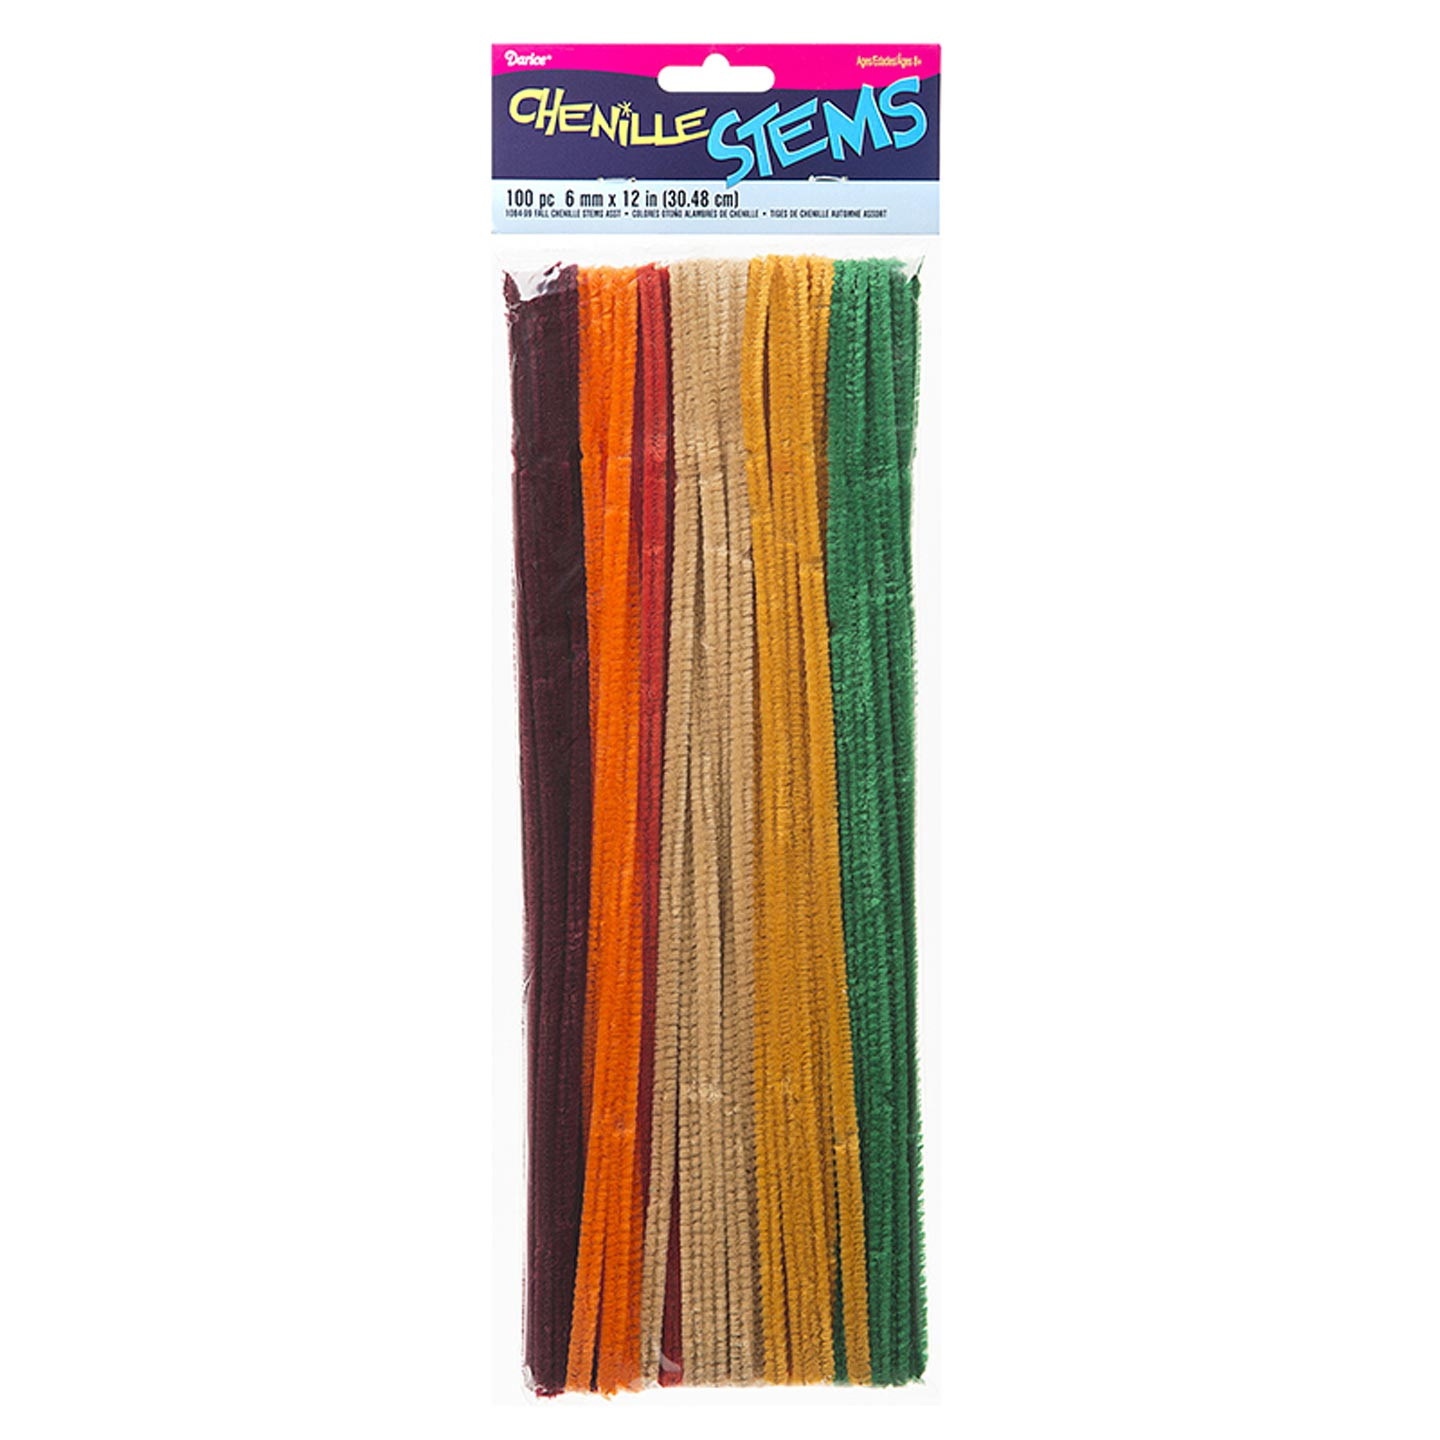 Colorations colorations Brown chenille Stem Pipe cleaners, Pack of 100,  Arts & crafts, Decorating, STEM, Single color, Activities for Kids